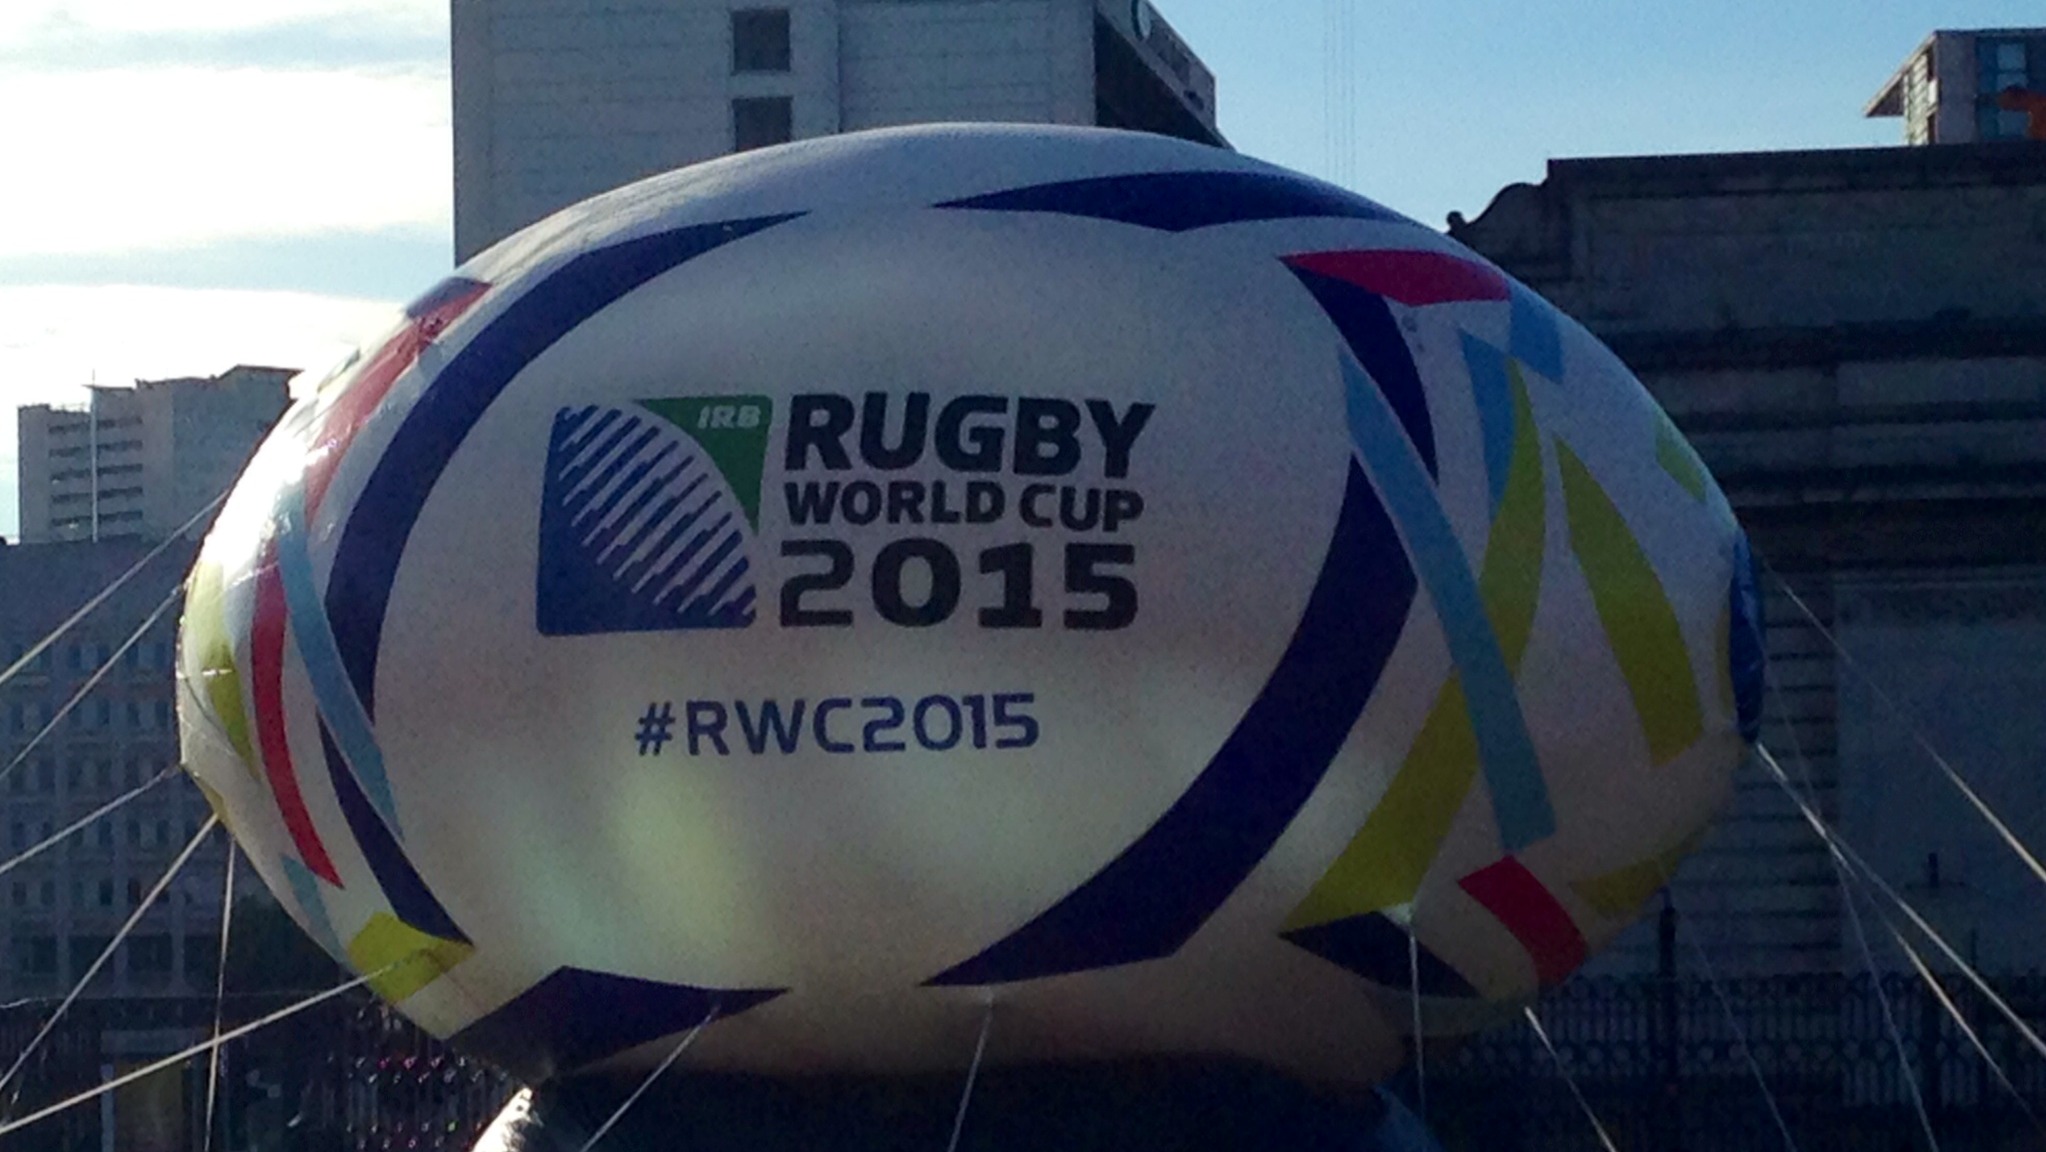 Rugby World Cup where can you find your nearest fanzones? ITV News